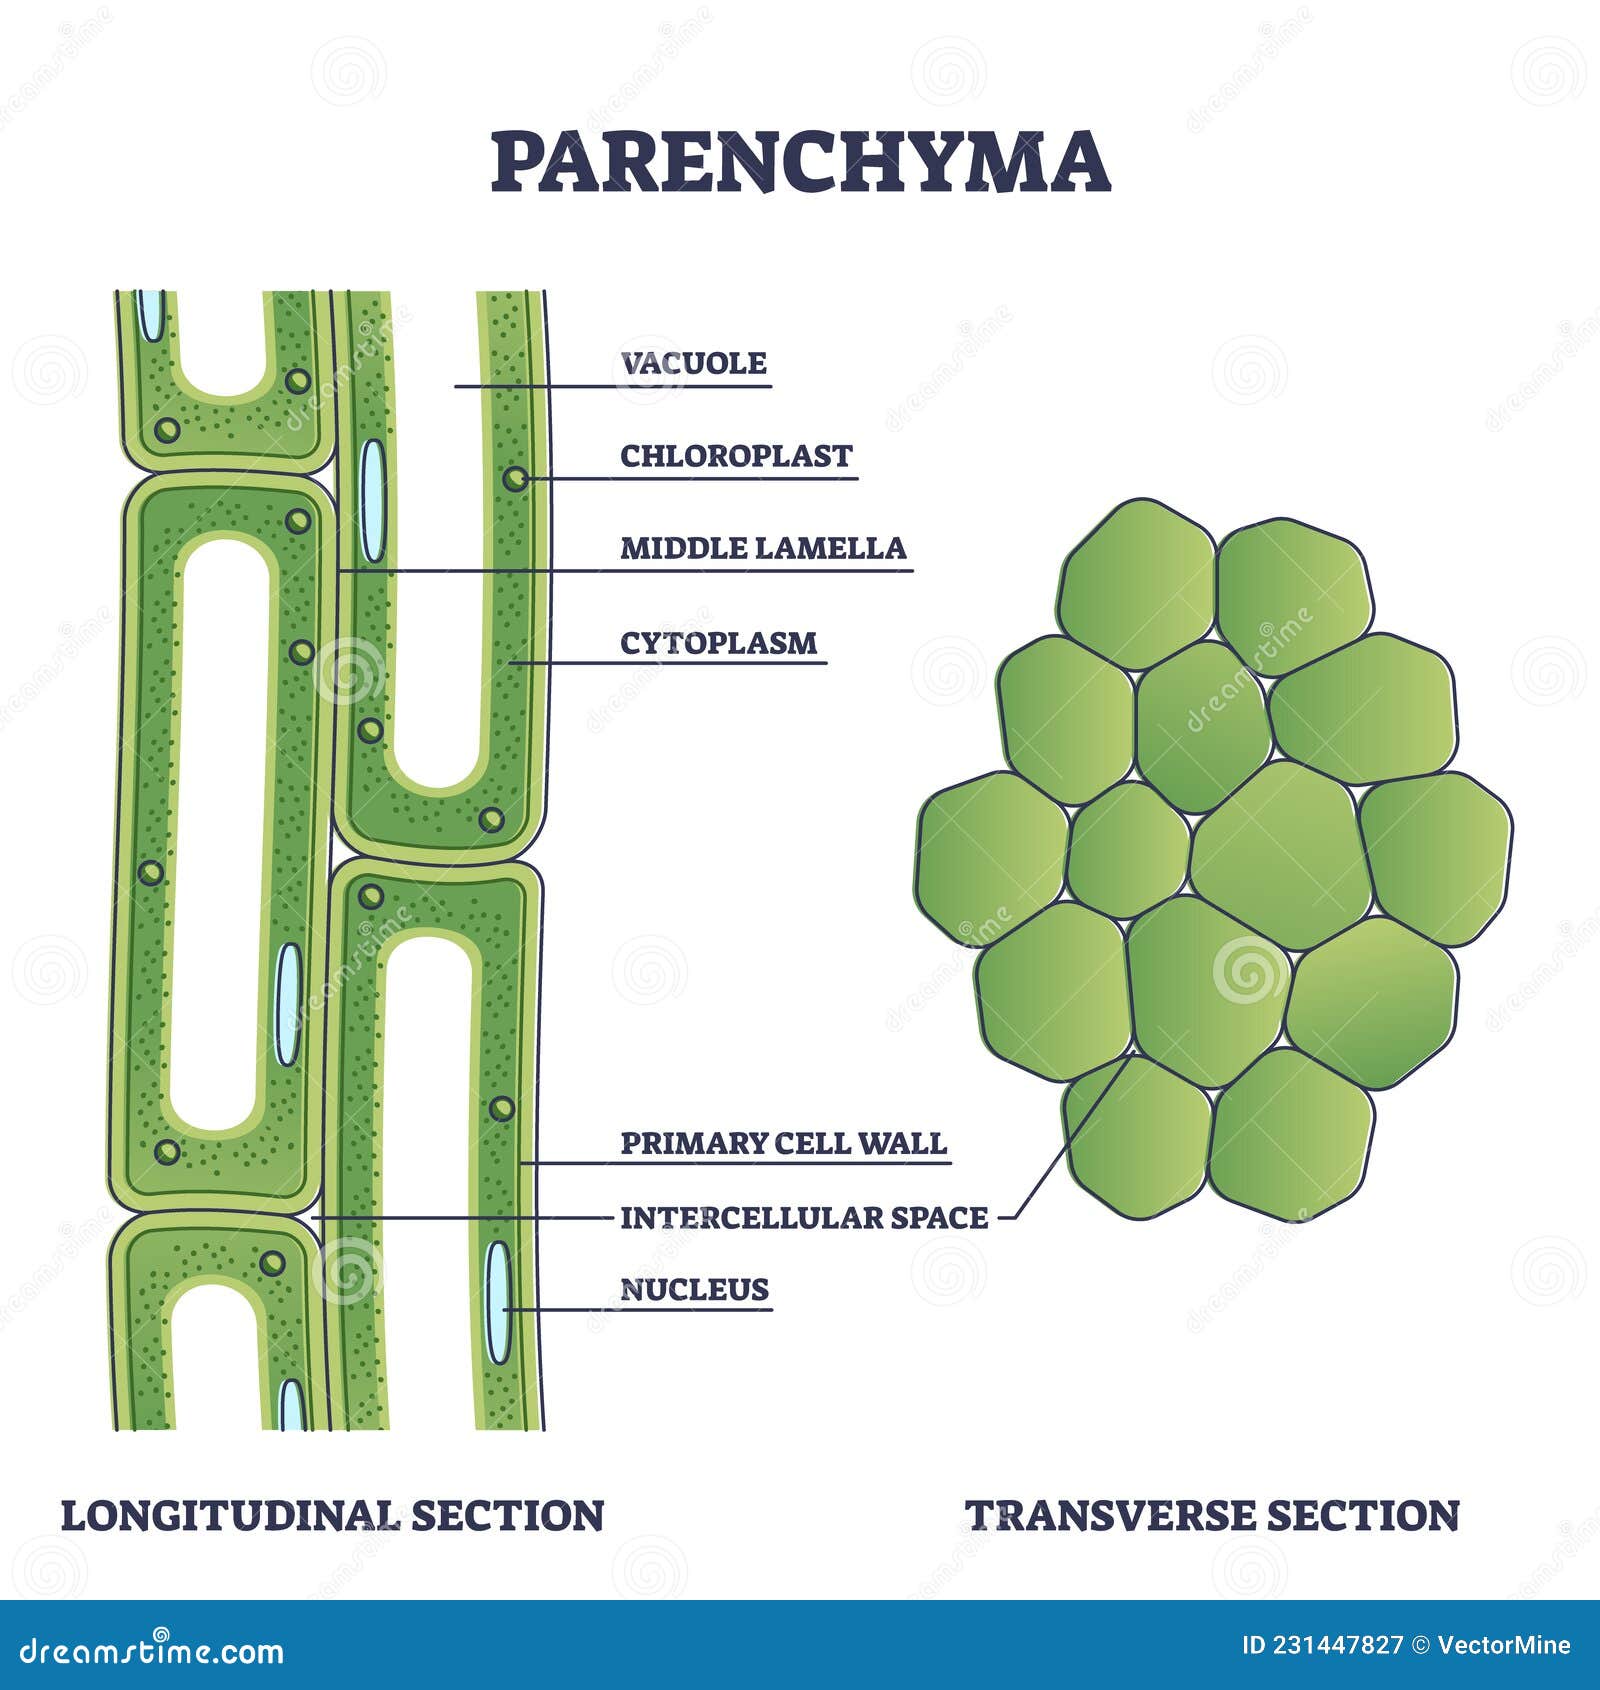 parenchyma as ground filler tissue for plant stem and roots outline diagram